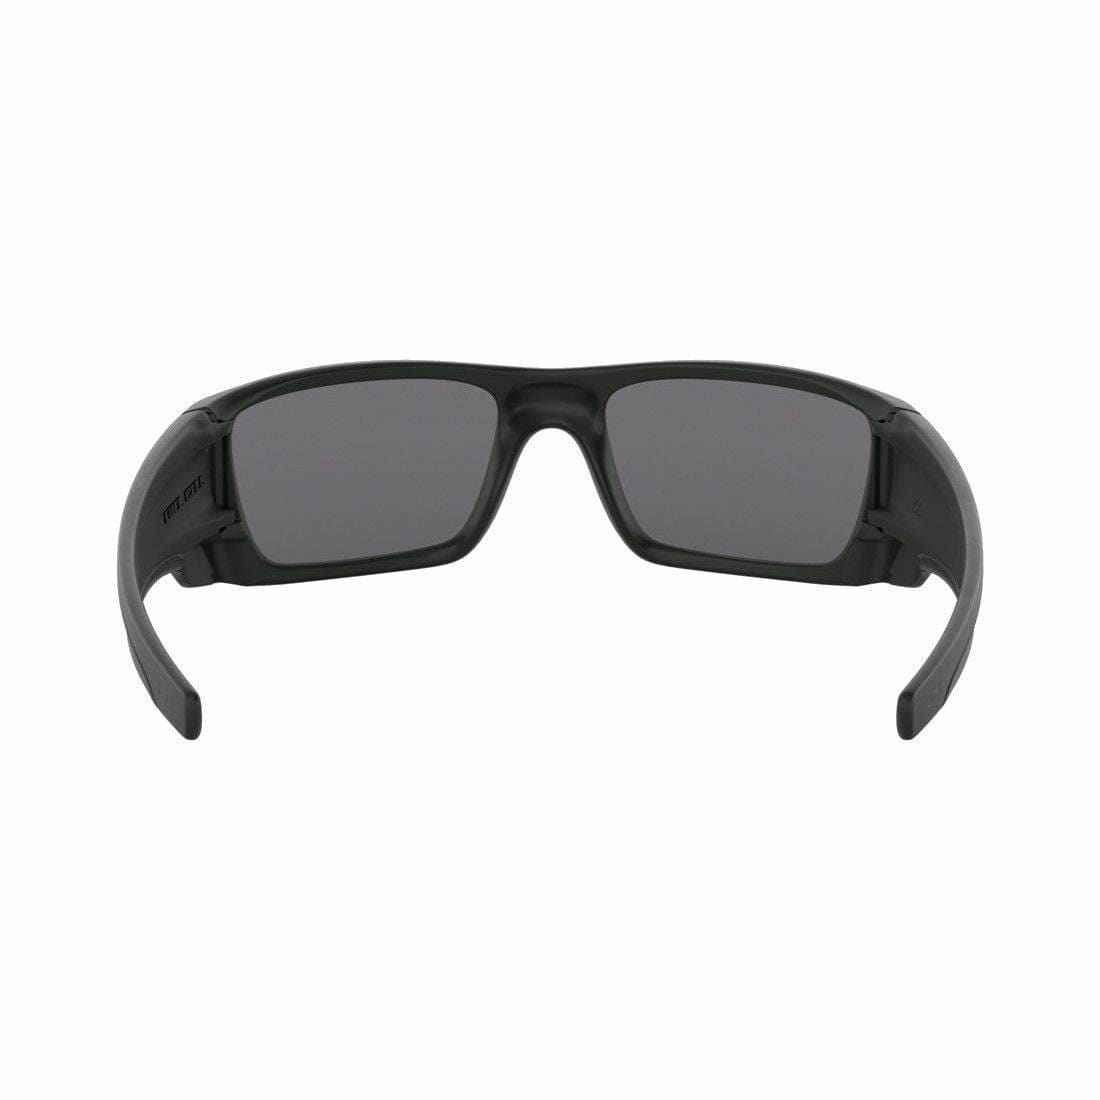 Oakley SI Fuel Cell Grey Wrap Men's Sunglasses OO9096 909638 60 - image 5 of 6